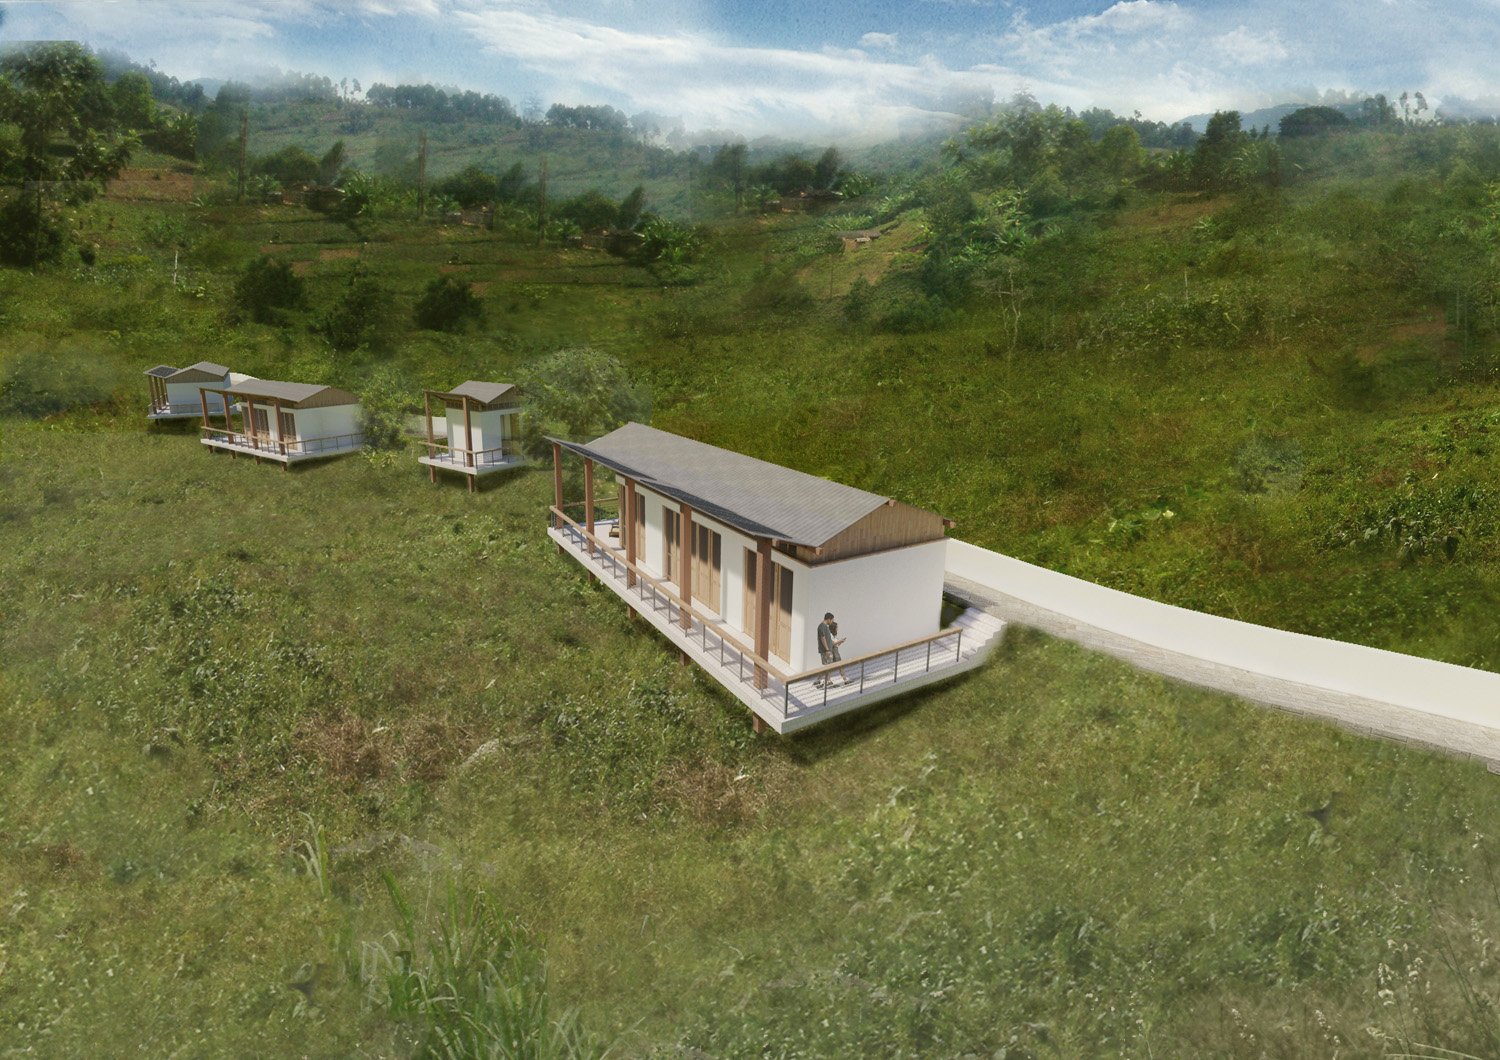 Bungalows From Above Rendering | SPG Architects